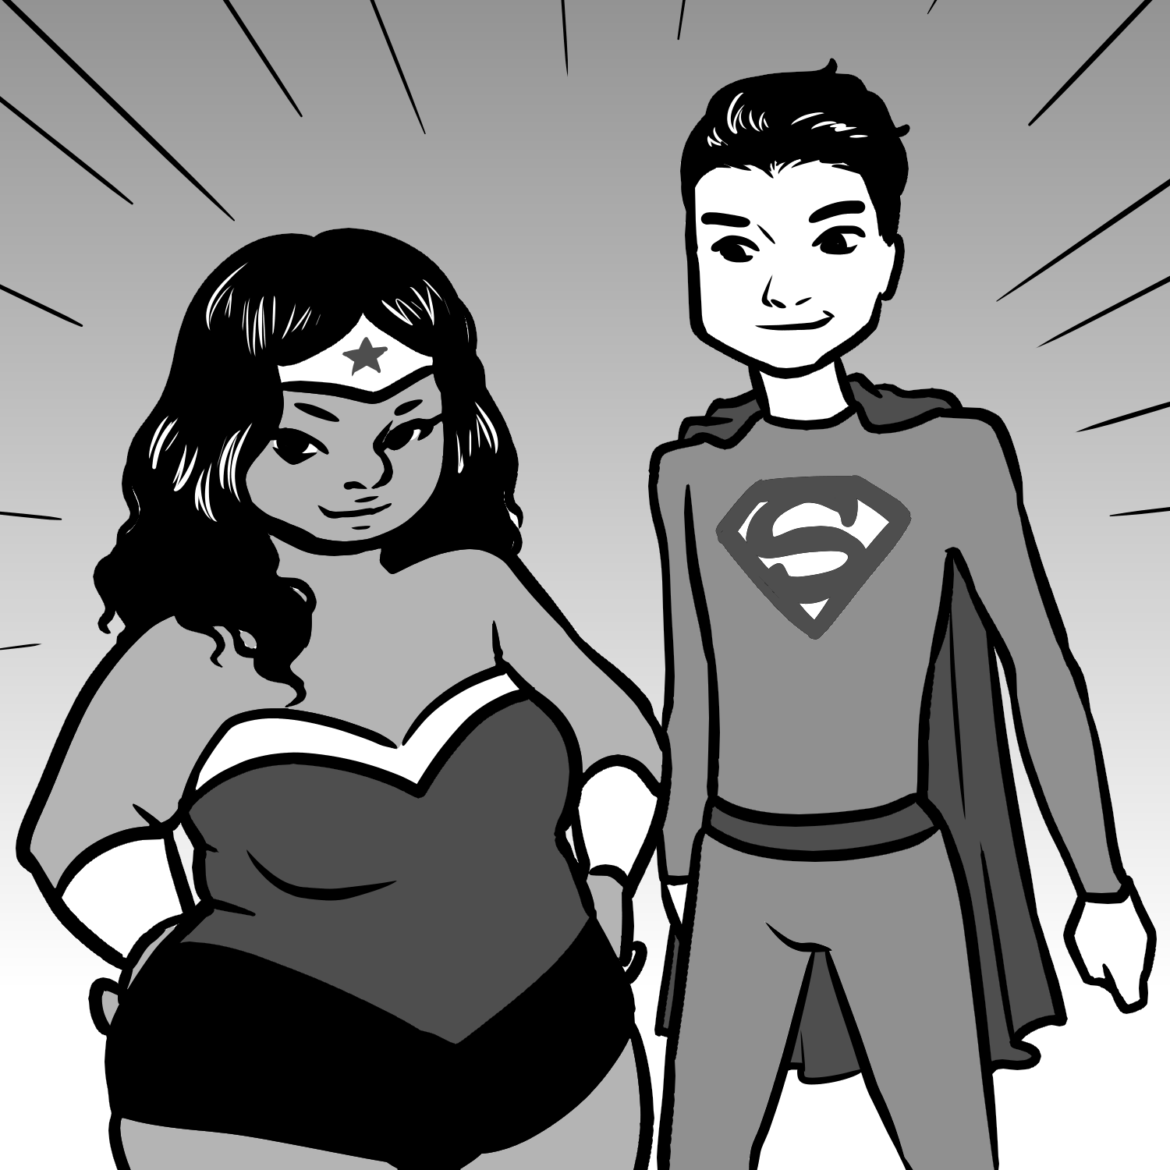 an illustration of Superman and Wonder woman